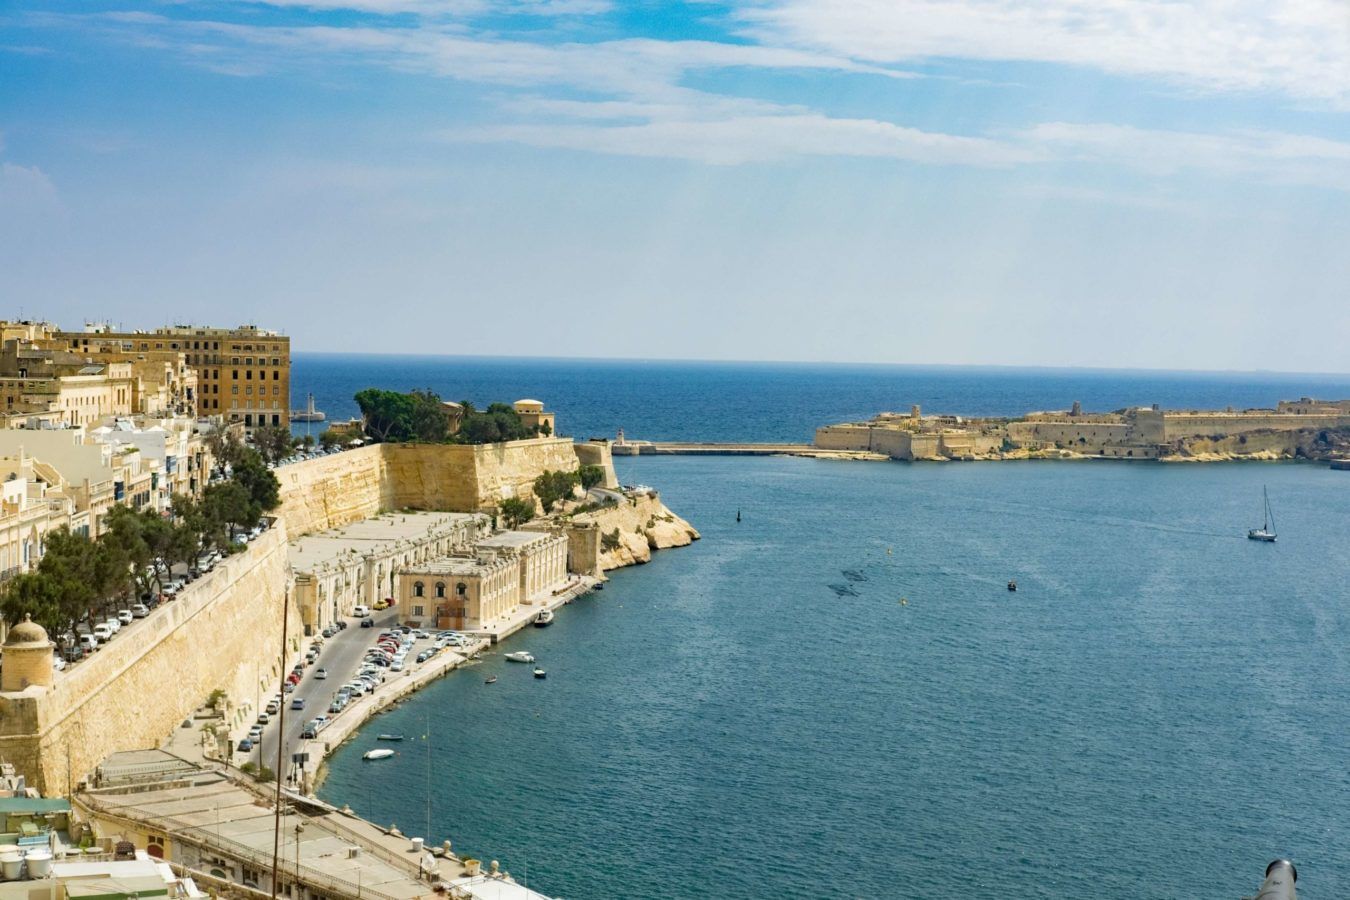 What to see, eat and do in the gorgeous archipelago of Malta